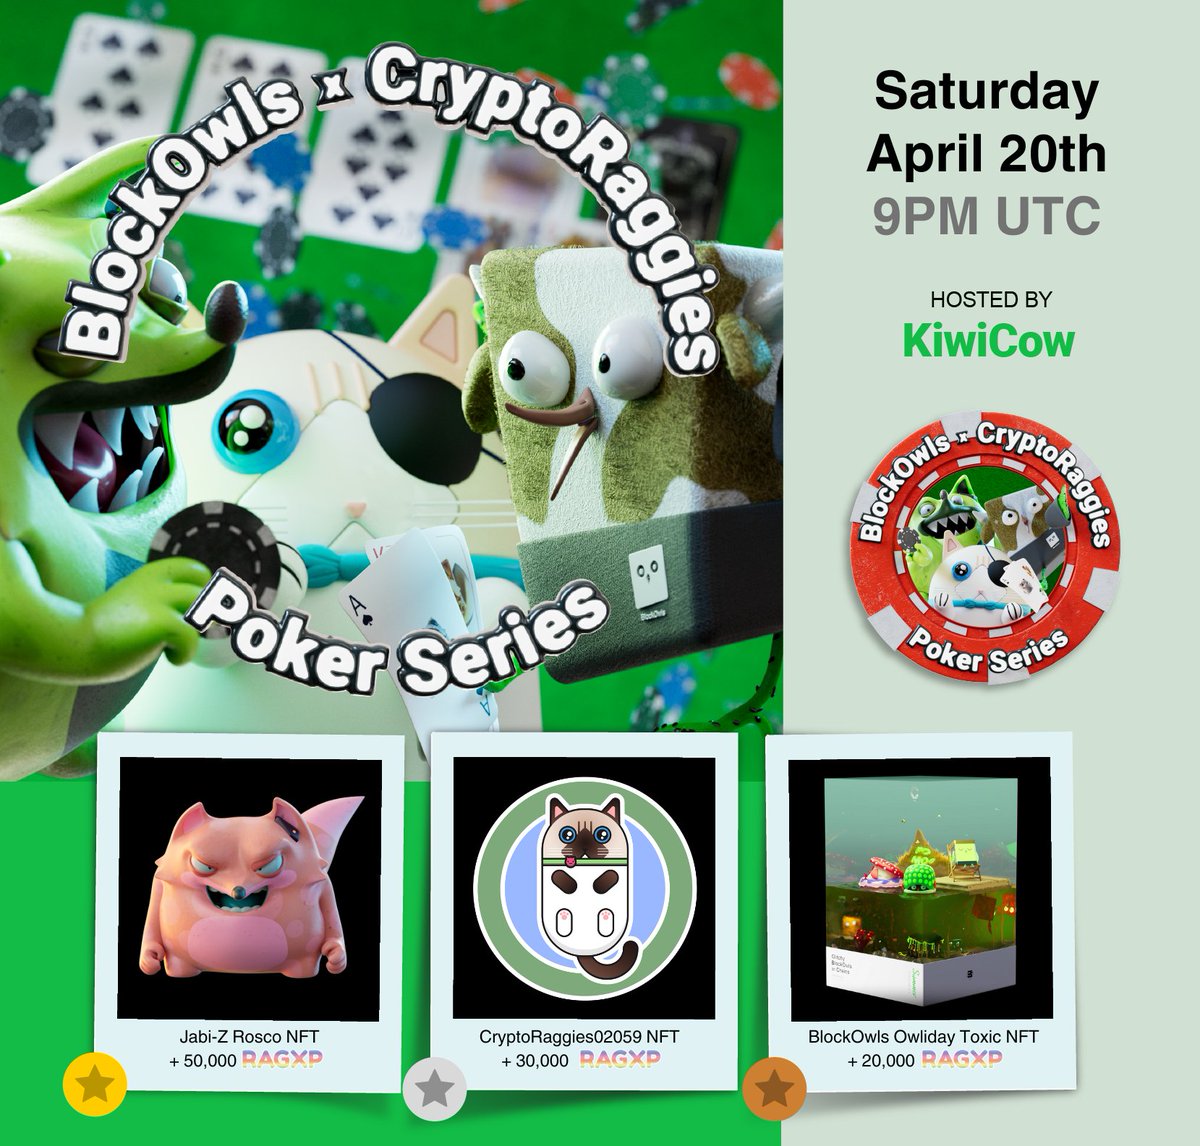 It's poker time! 🃏🦉 Join the excitement with our fantastic host @kiwicowNFT this Saturday, April 20th, at 9 pm UTC for our weekly poker bash! Registration is available for BlockOwls, Jabi-Zs, and Cryptoraggies holders. See you at the tables on Saturday! 🦊